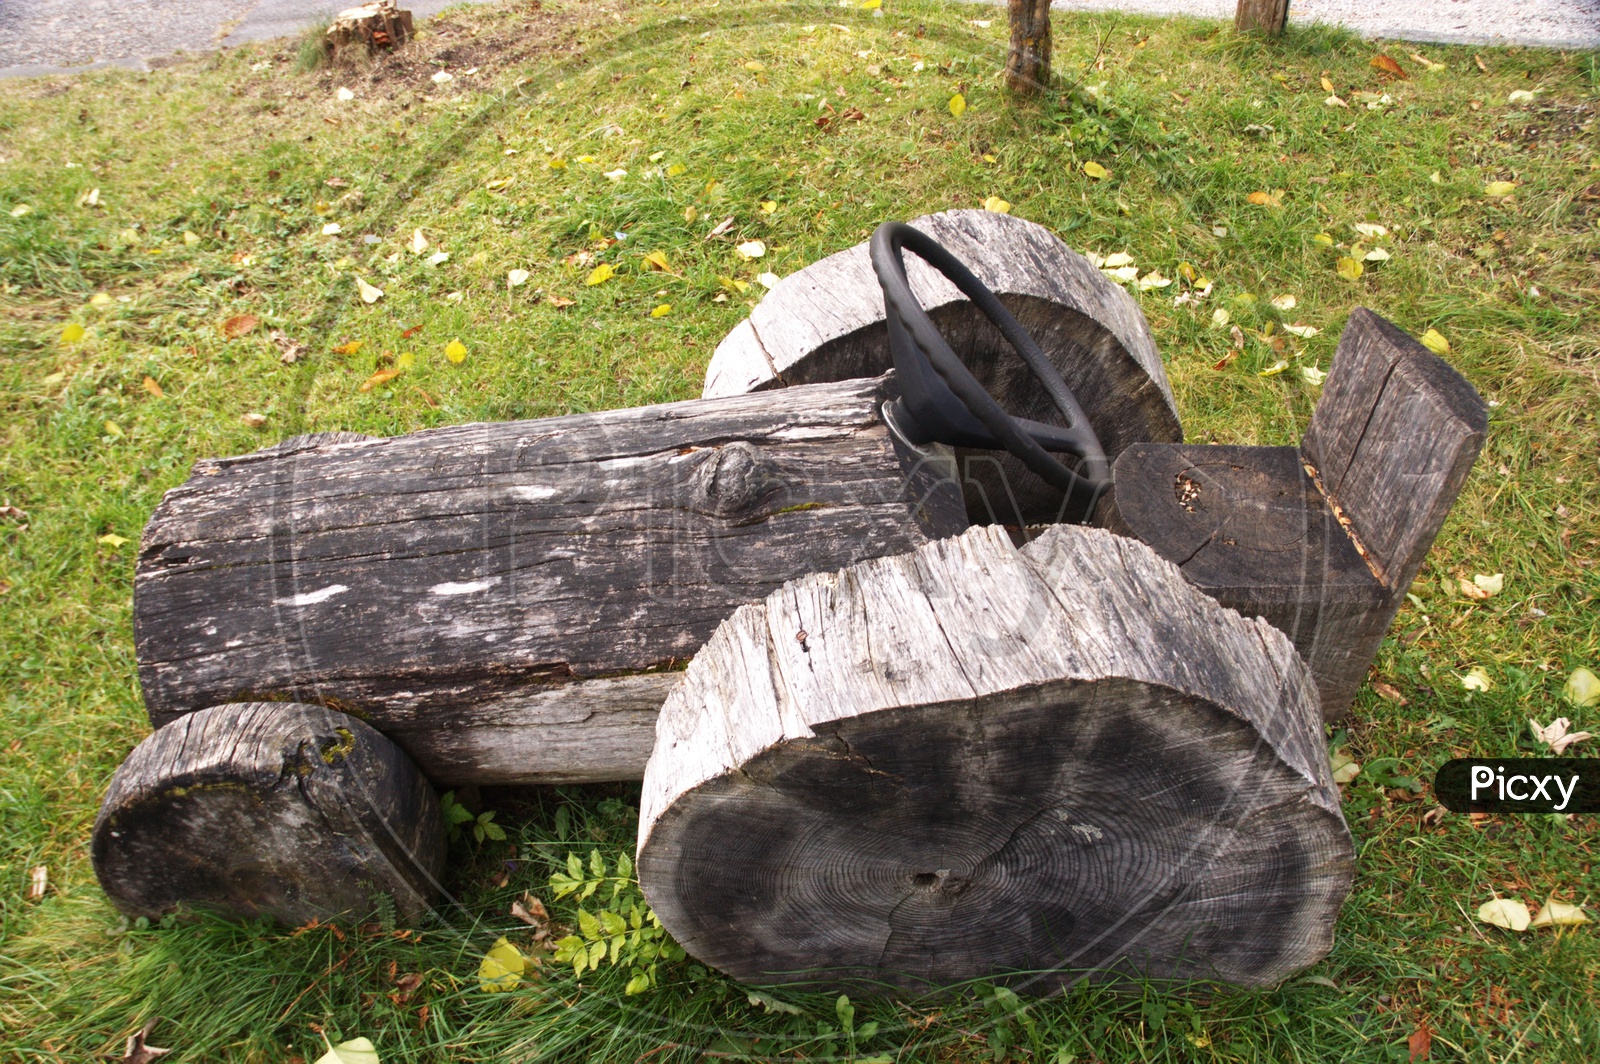 A Tractor Model With Wood Logs In a Garden